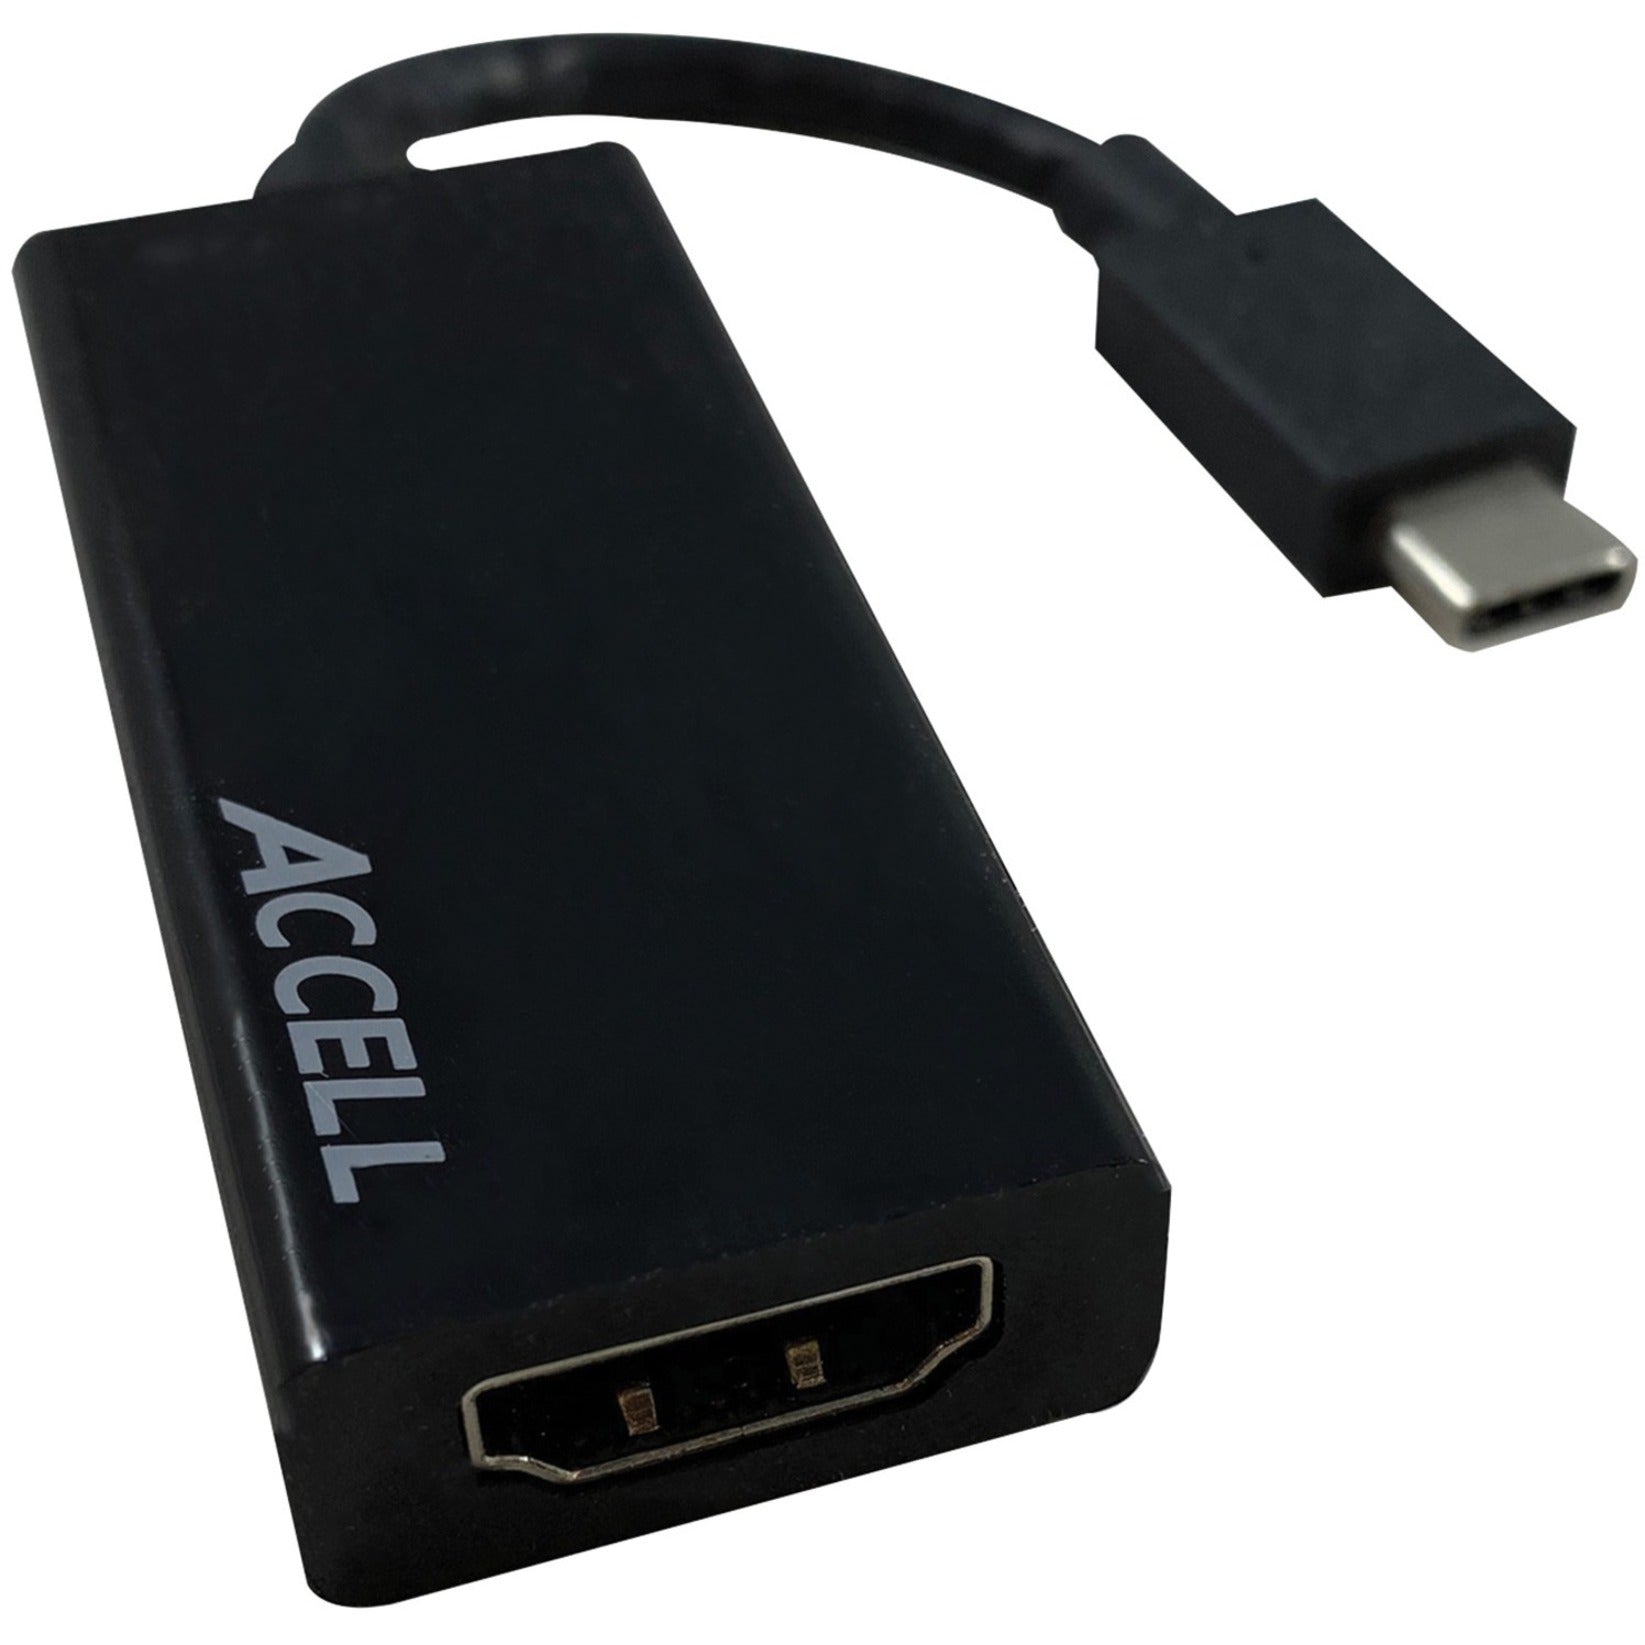 Accell U187B-005B USB-C to HDMI 2.0 Adapter, Connect Your USB-C Device to HDMI Display